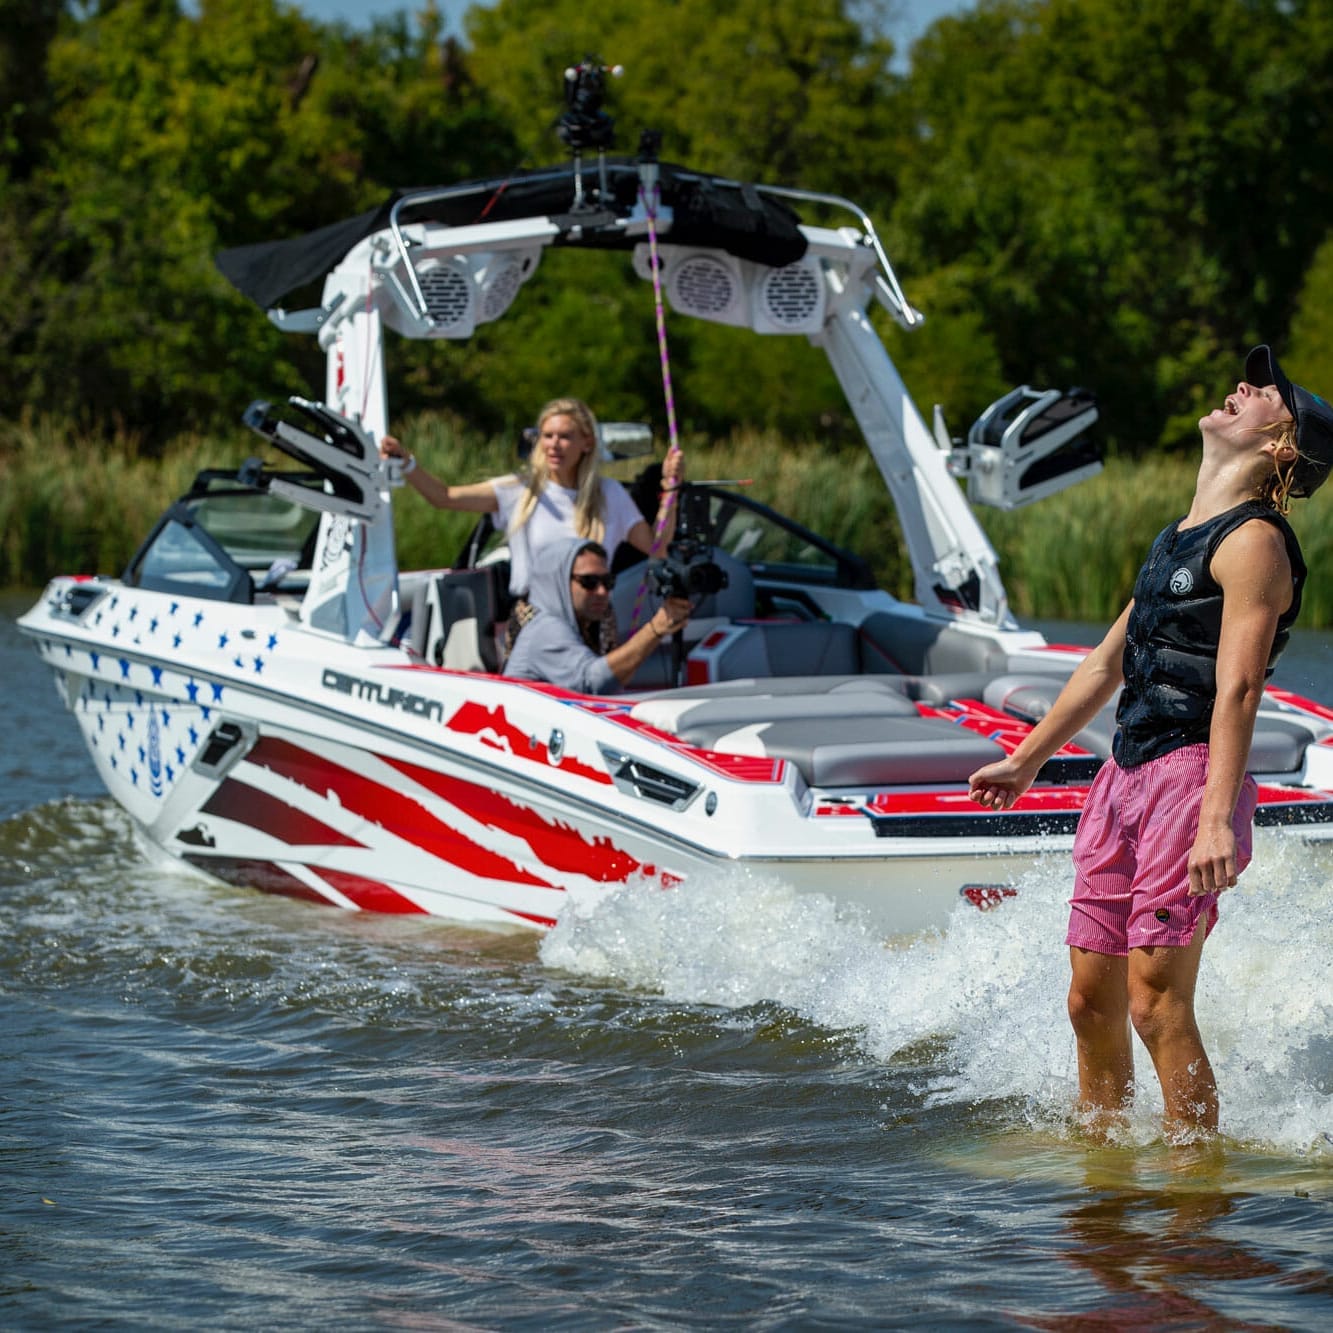 Two people standing on a wakesurf boat.